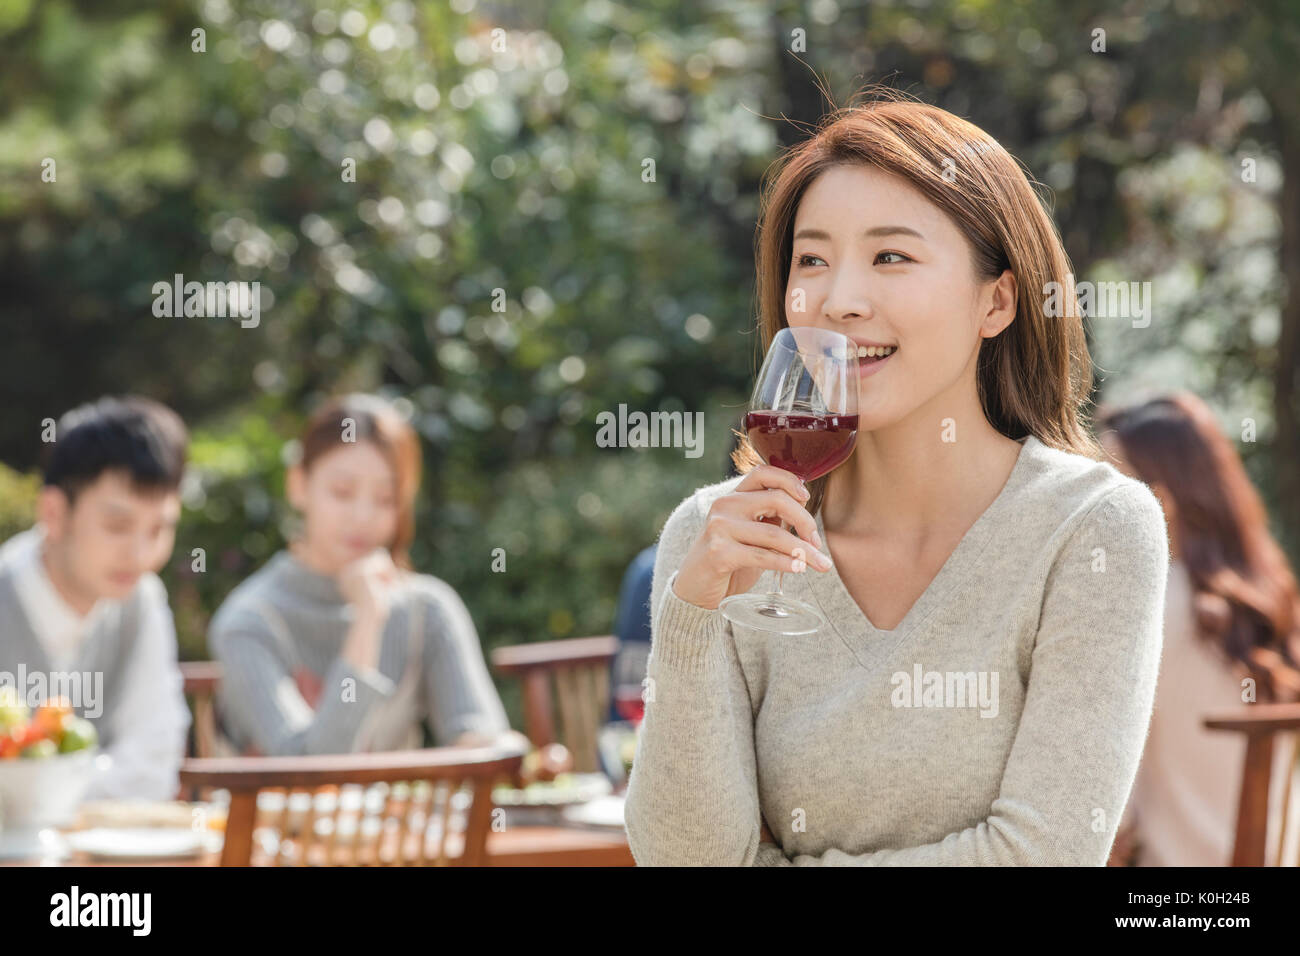 Portrait of young smiling woman holding a glass of wine at garden party Stock Photo